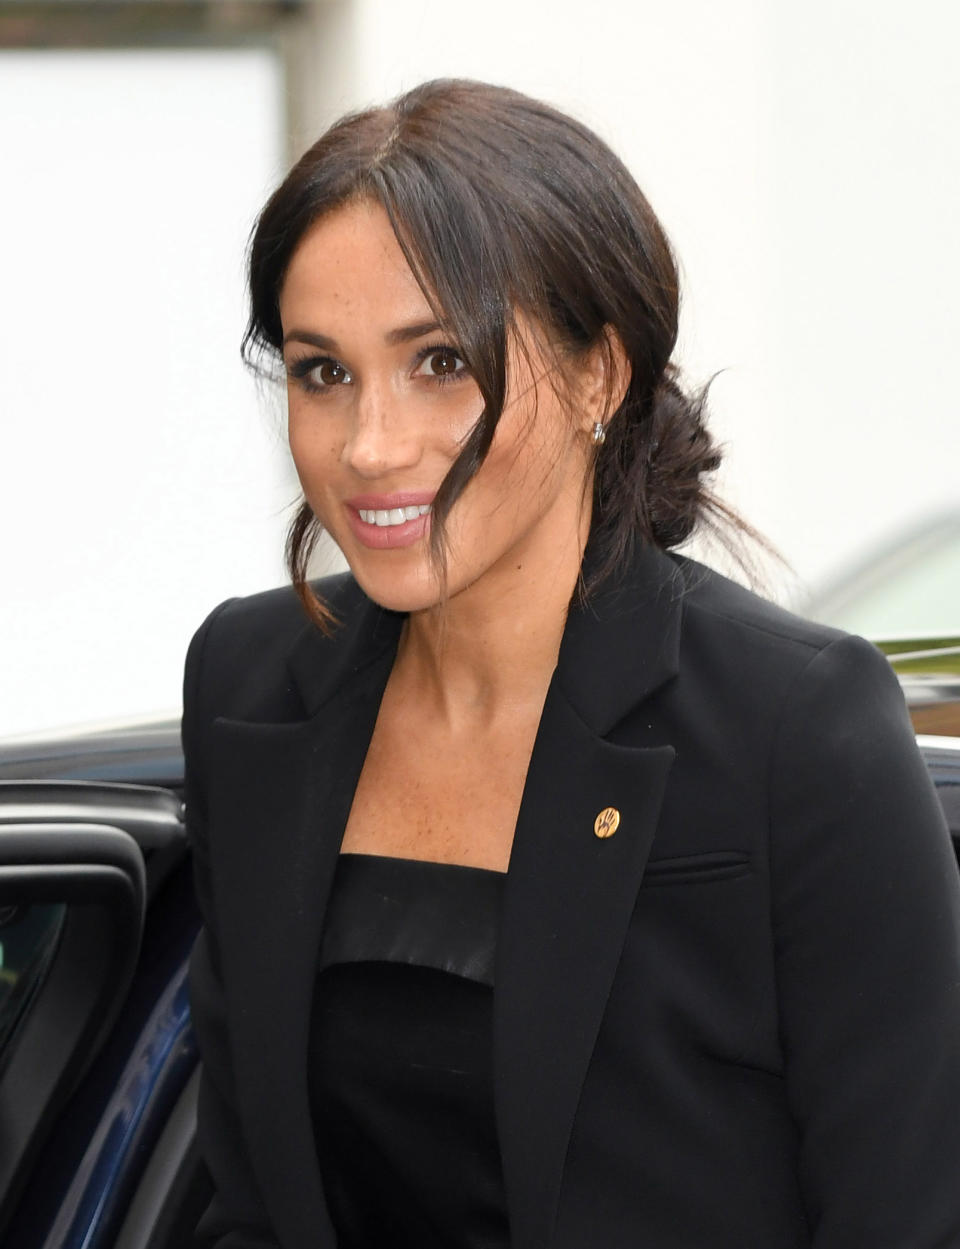 Meghan Markle belonged to the Kappa Kappa Gamma sorority at Northwestern University during 2000-2003. A chapter of the sorority in New Mexico is being investigated for alleged racist remarks by some members. (Photo: Getty Images)